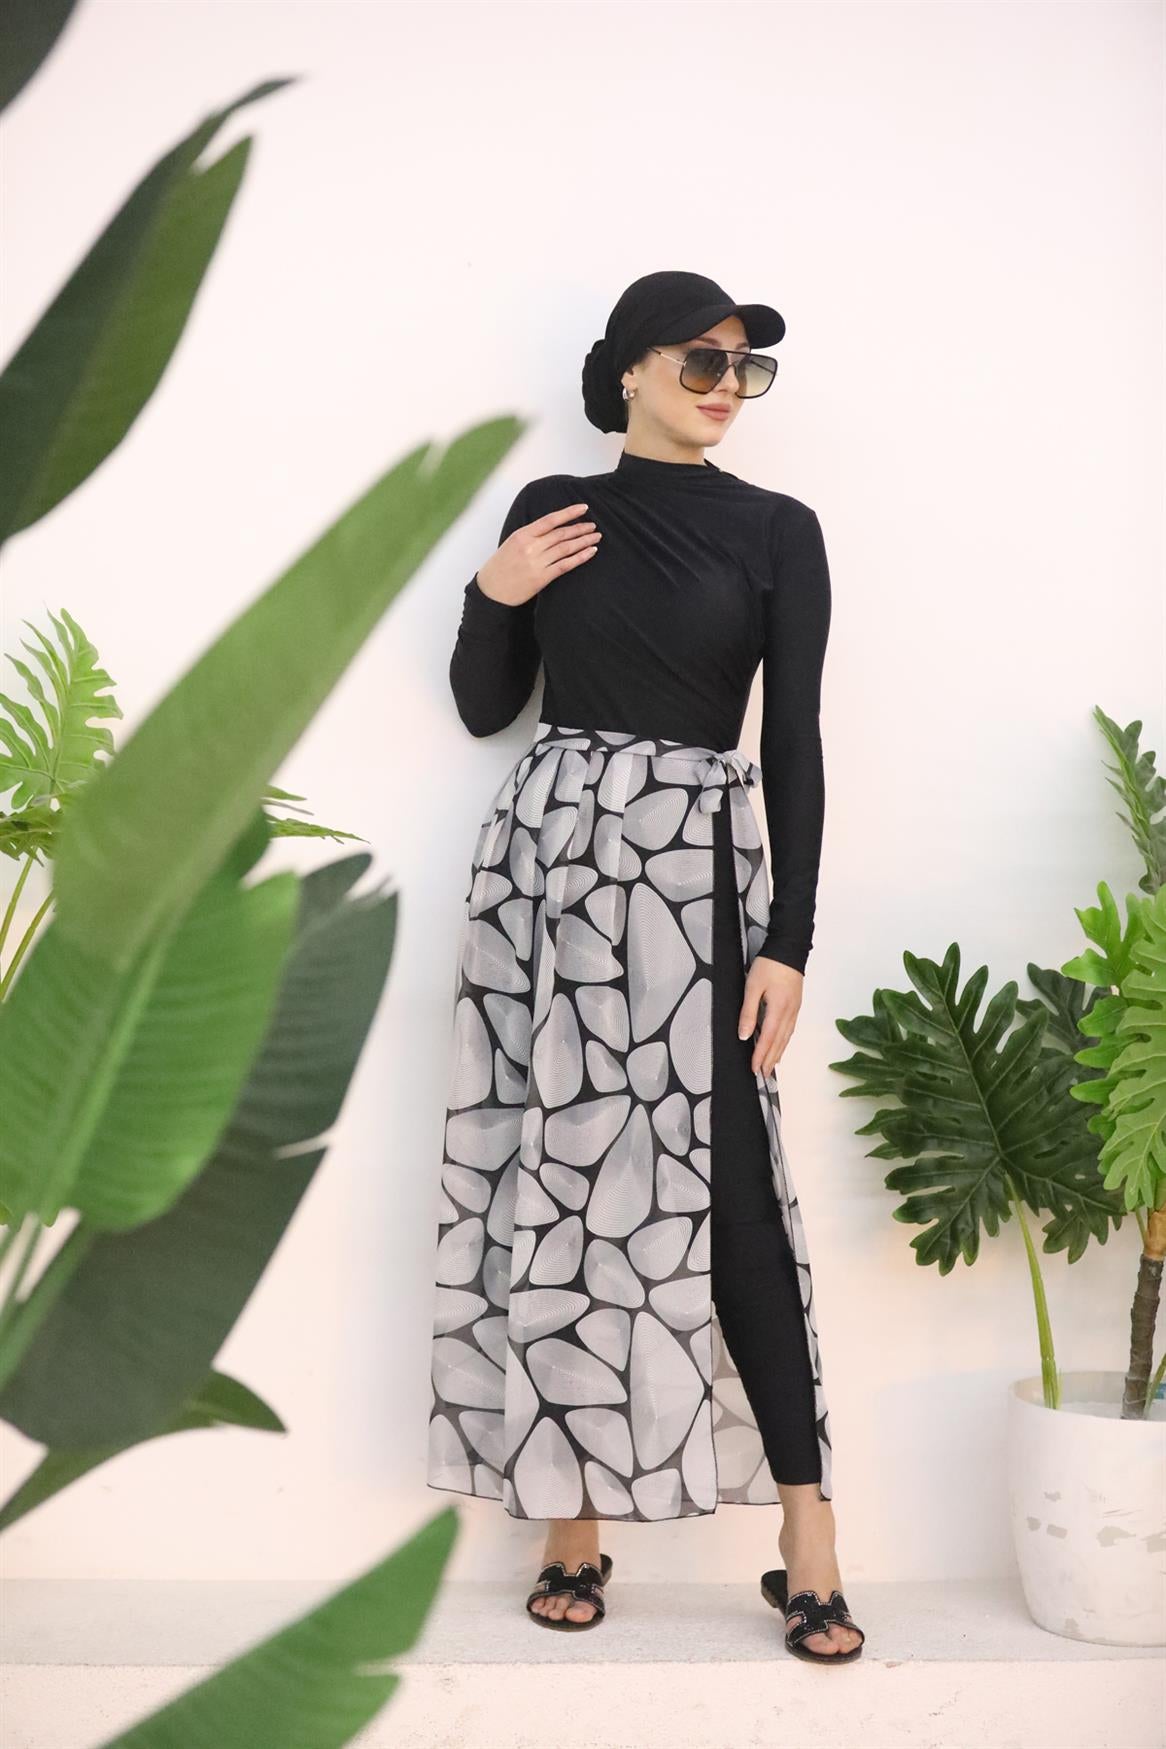 Stone Patterned Skirt Pareo